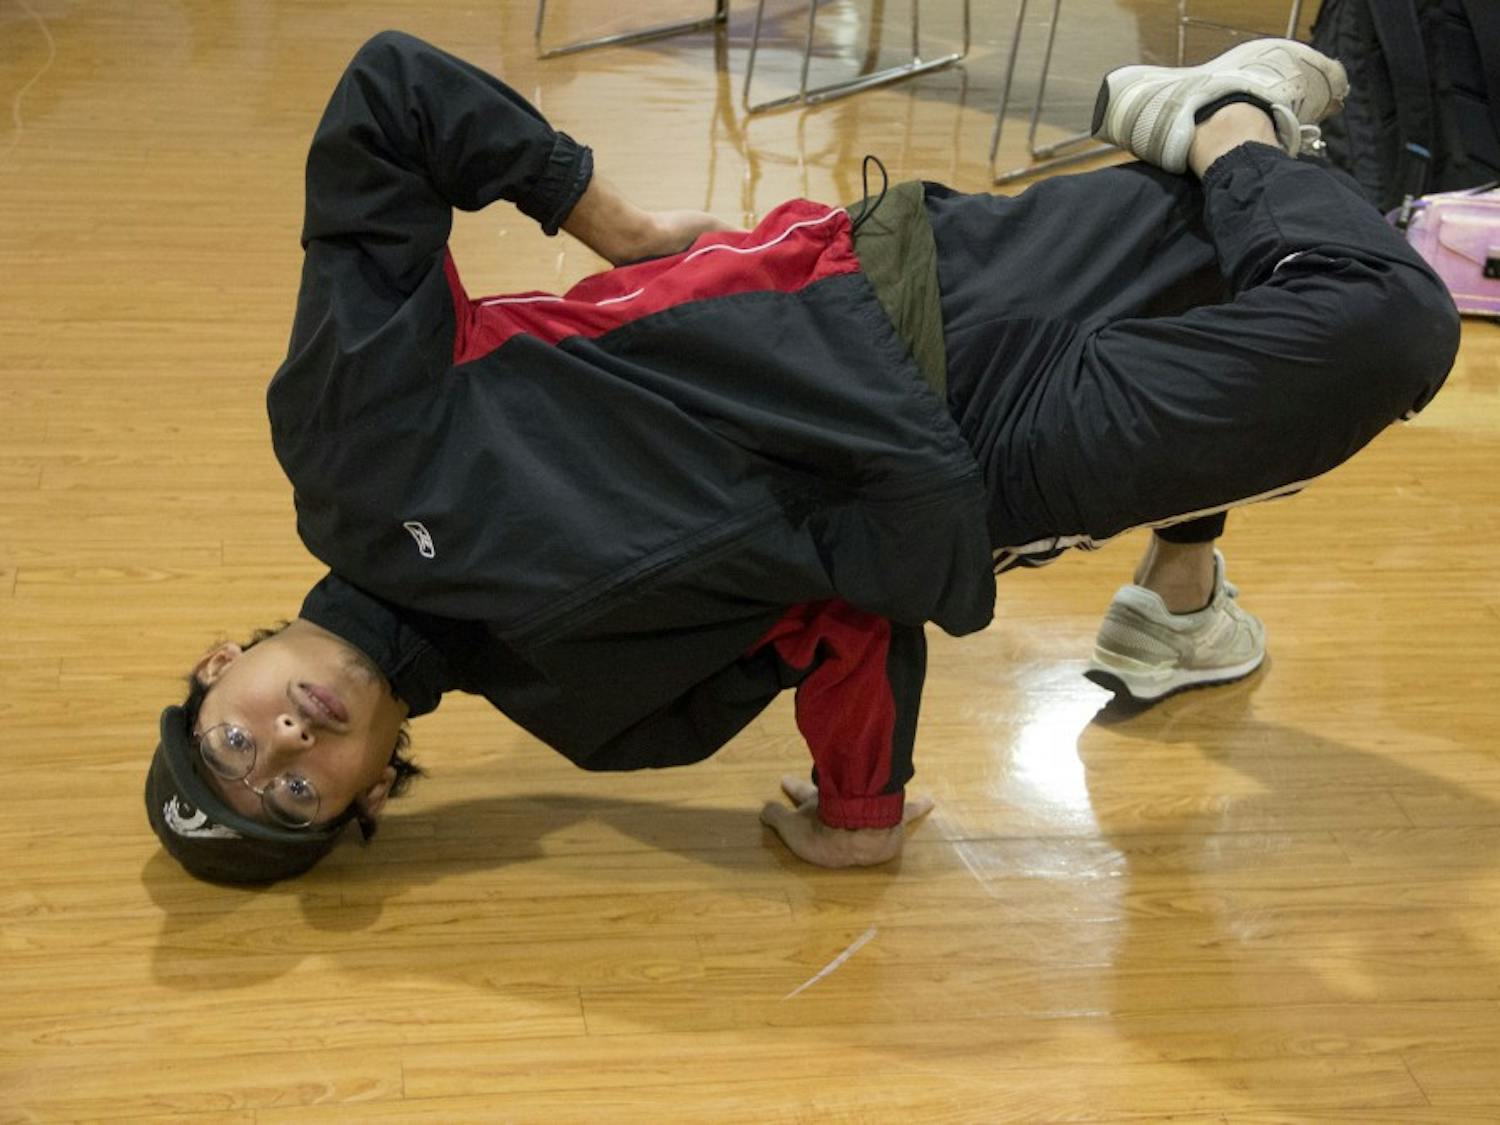 Members of the UB Breakdancing club performing. The UB Breakdancing club helps cultivate breakdancing and learn the craft on campus